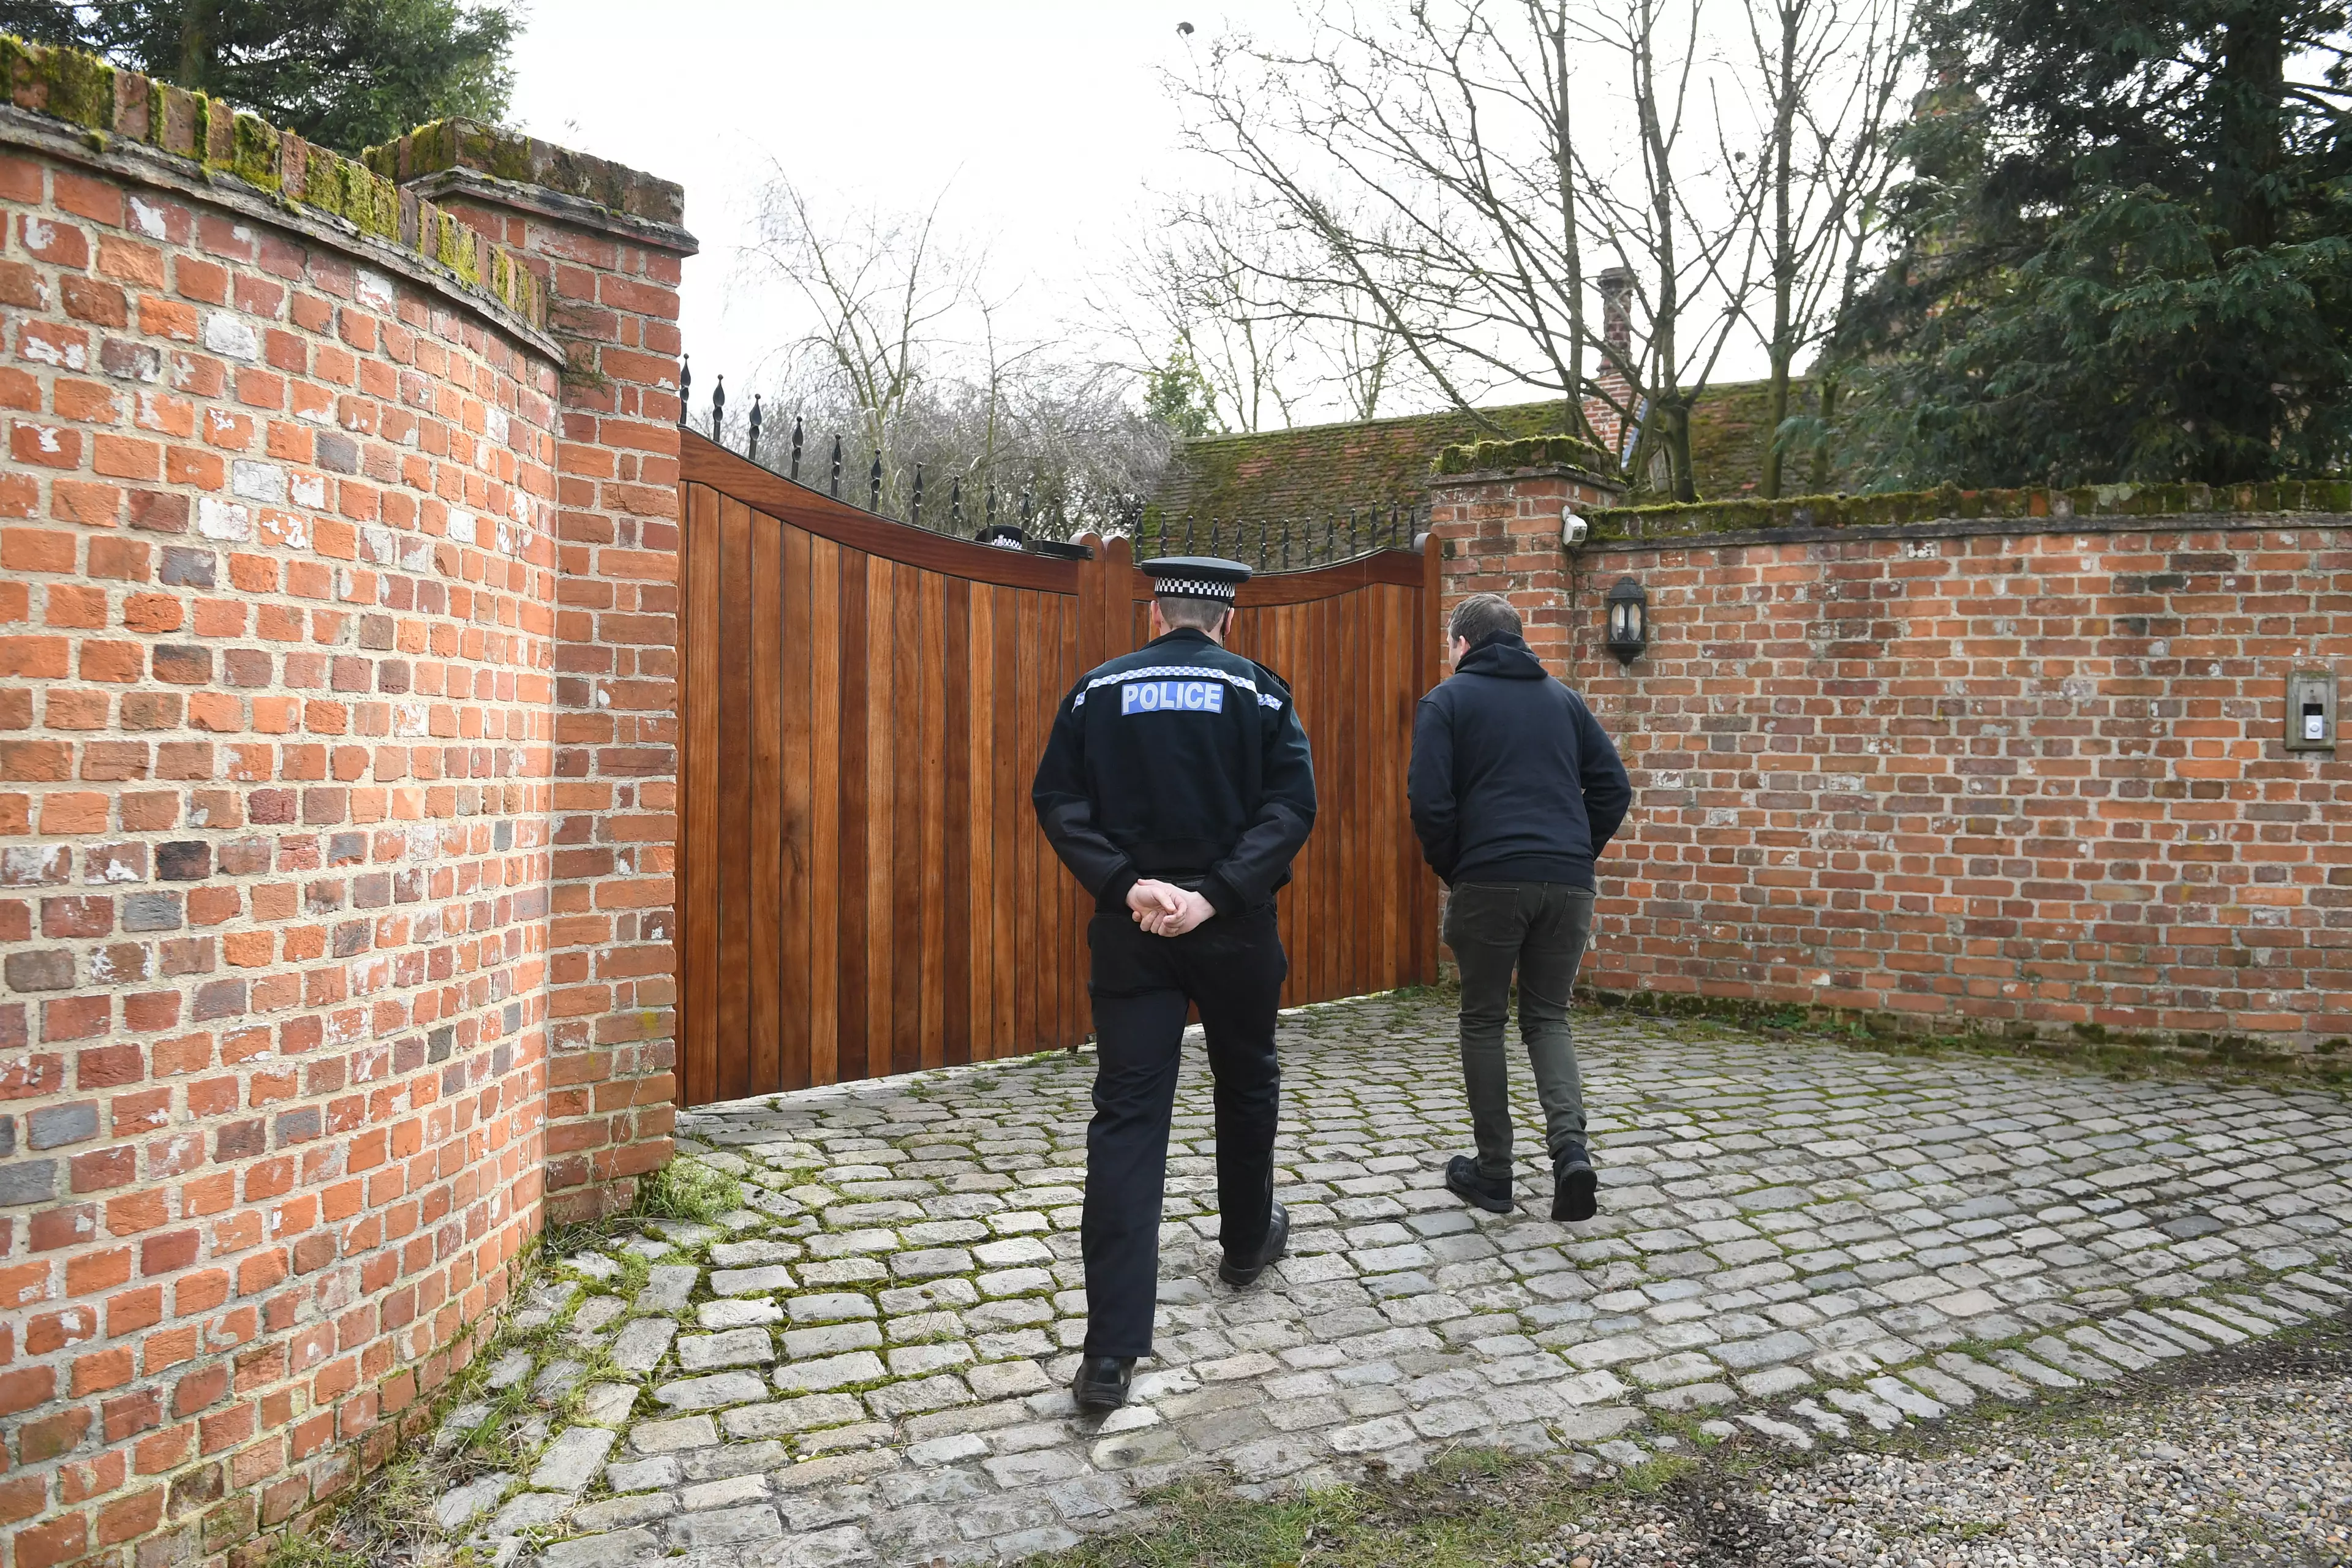 Police outside Keith Flint's house in Essex this morning.